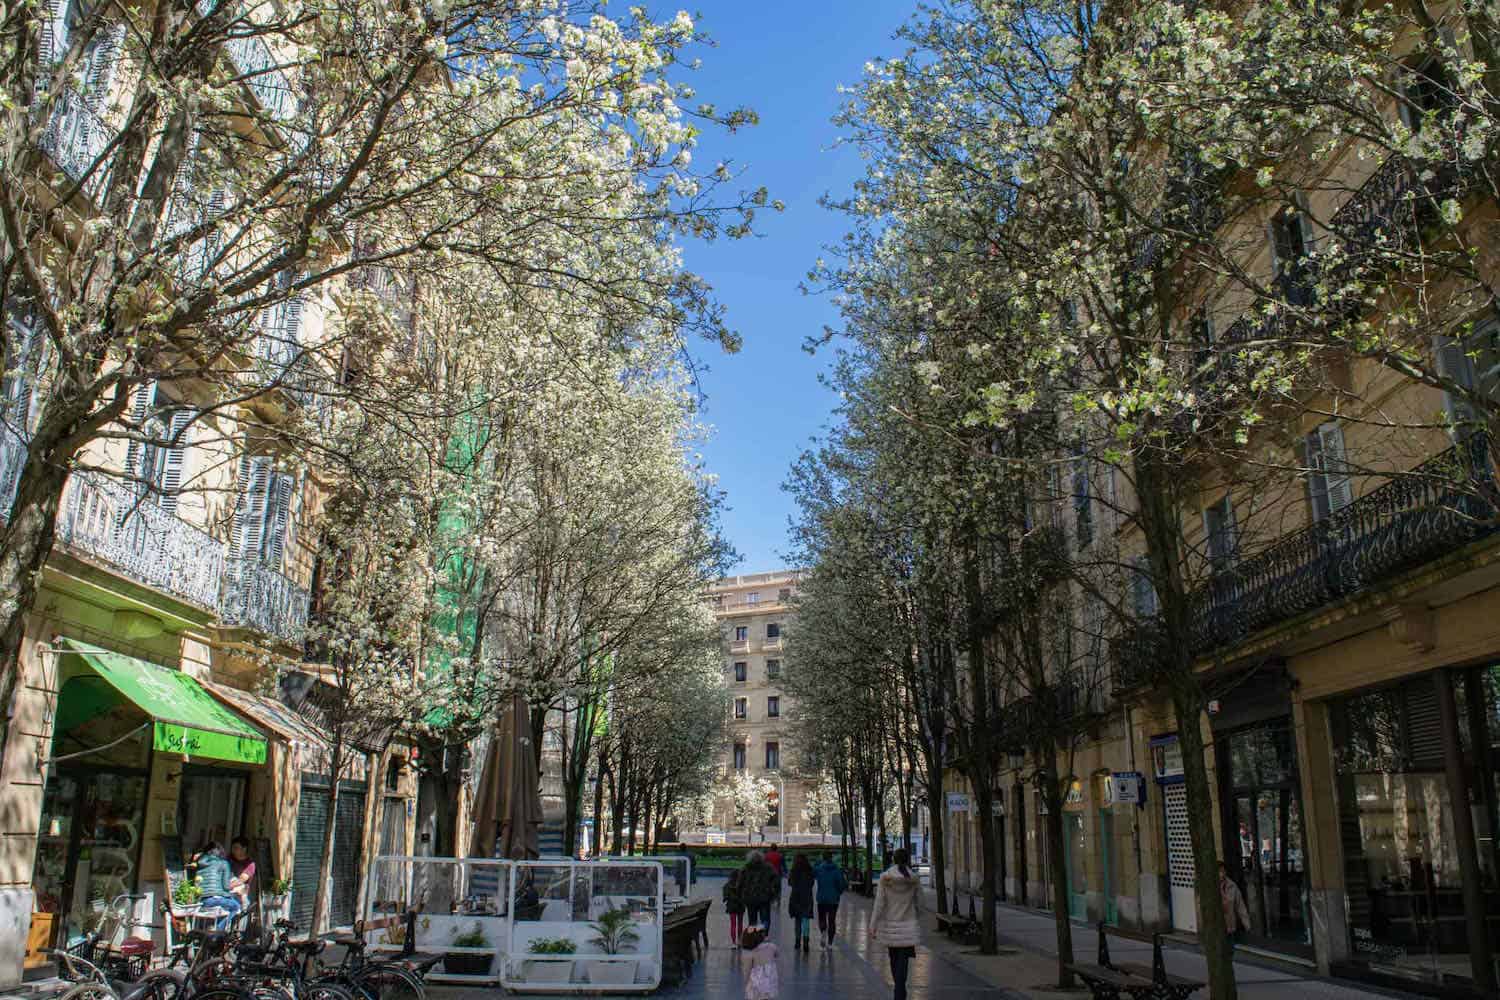 City street lined with trees that are blooming white